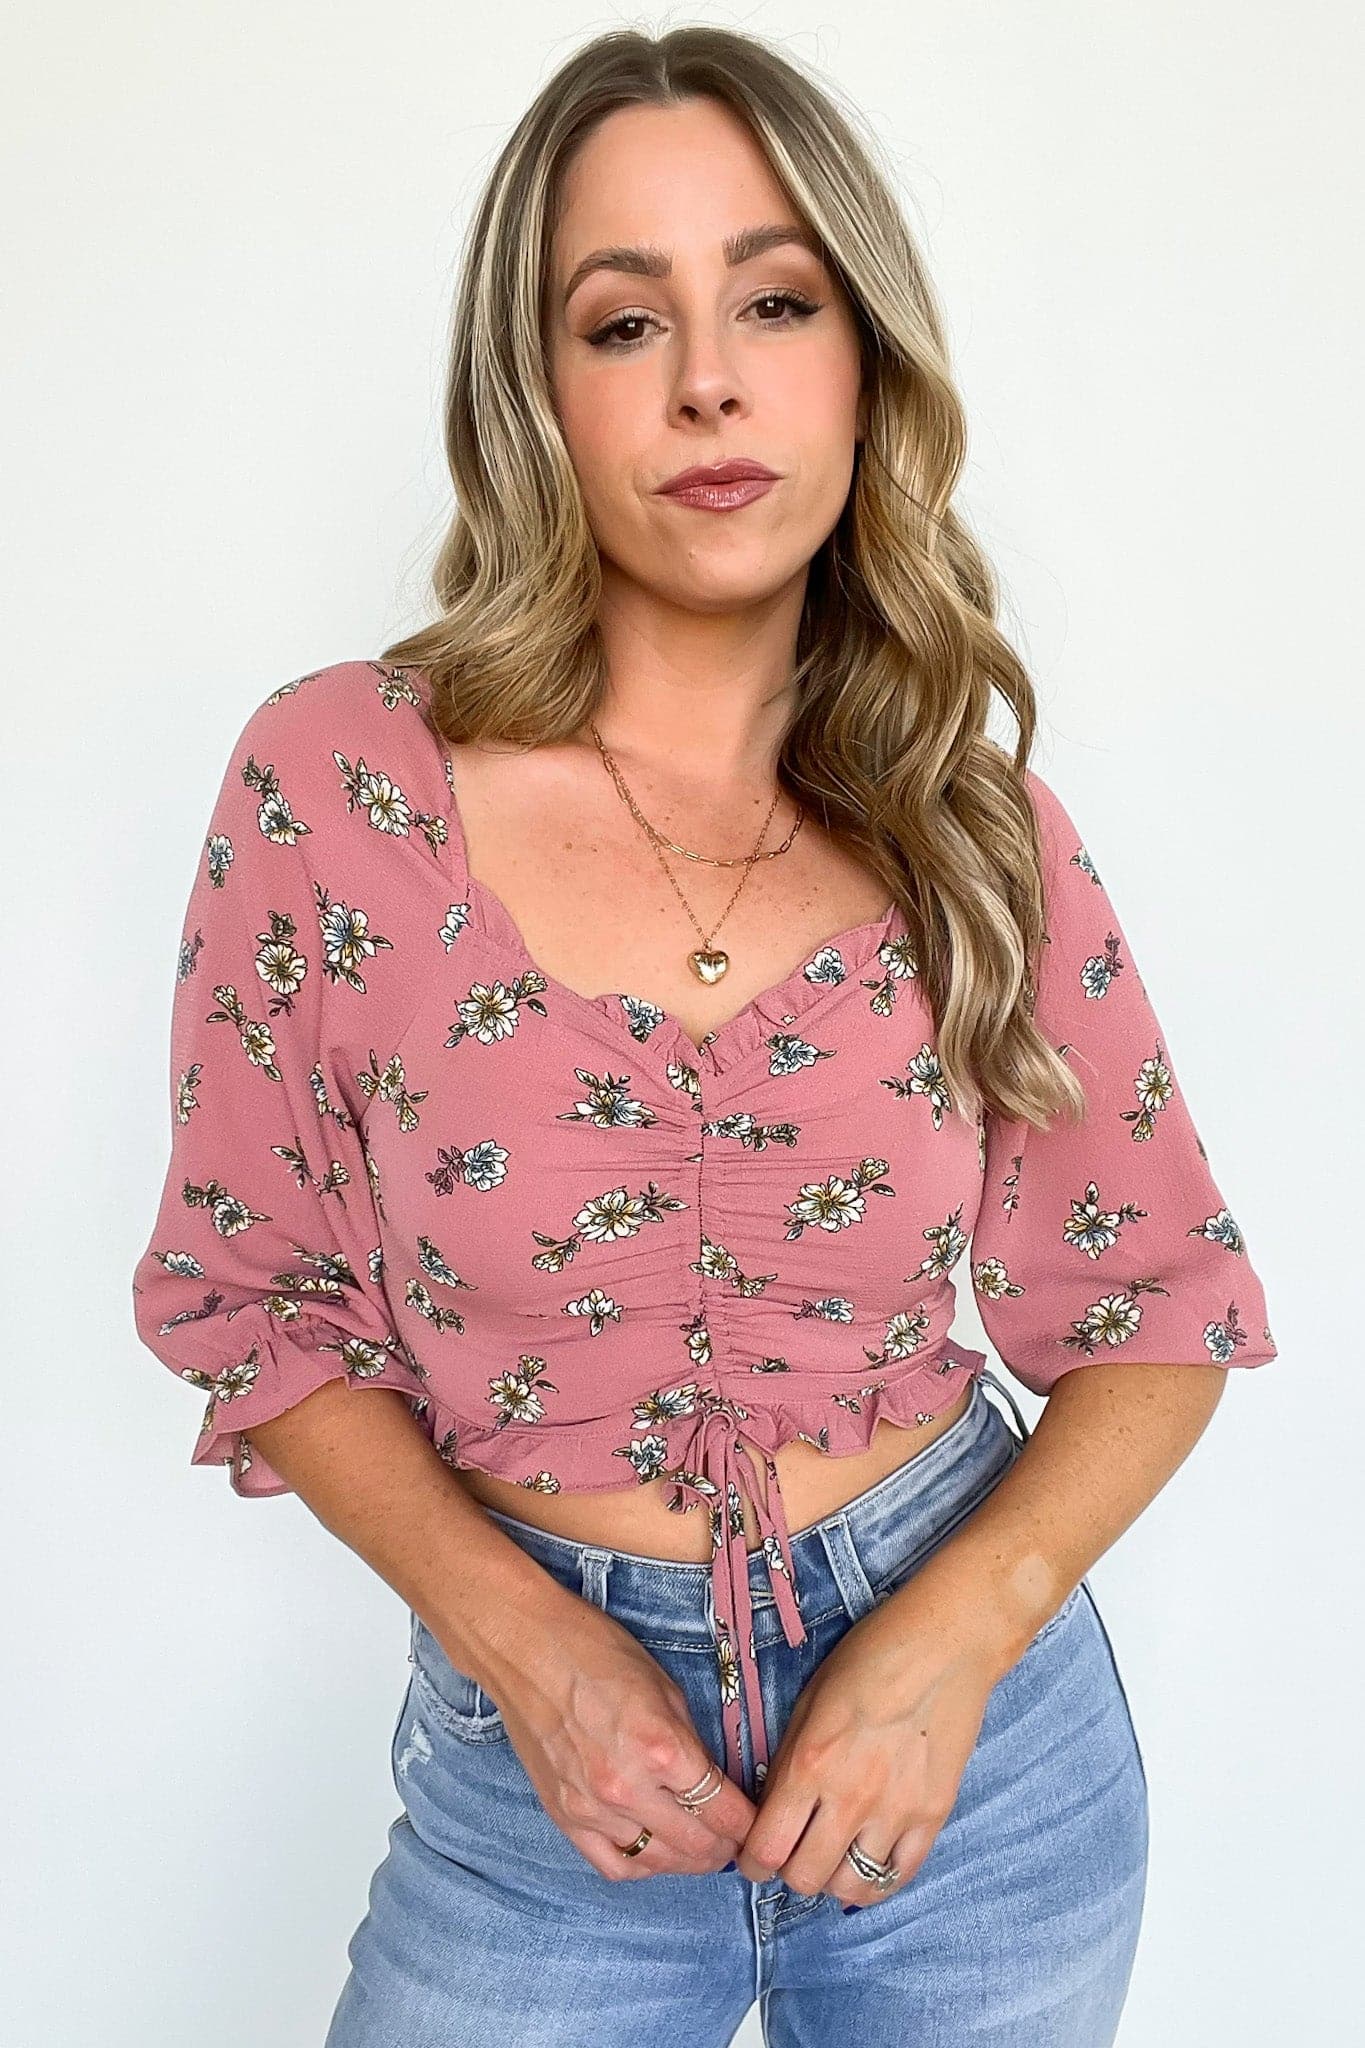  Zoia Floral Print Ruffled Cropped Top - FINAL SALE - Madison and Mallory